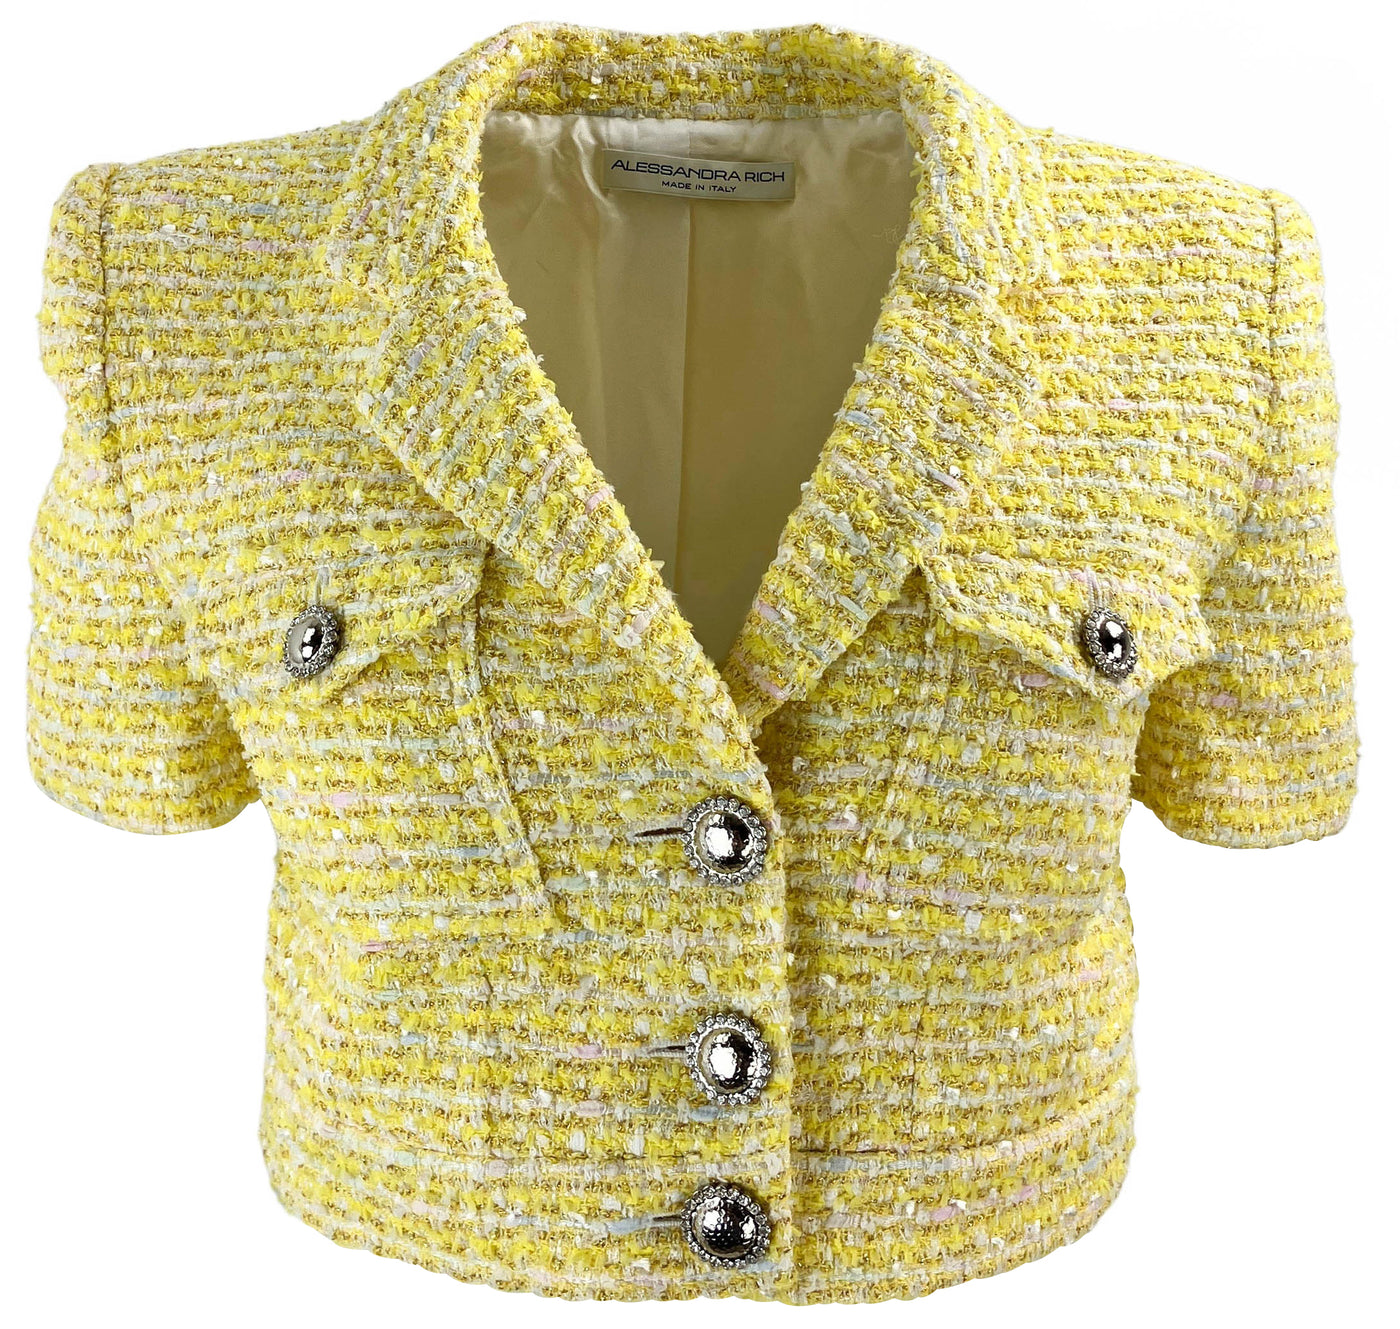 Alessandra Rich Cropped Tweed Jacket in Yellow - Discounts on Alessandra Rich at UAL